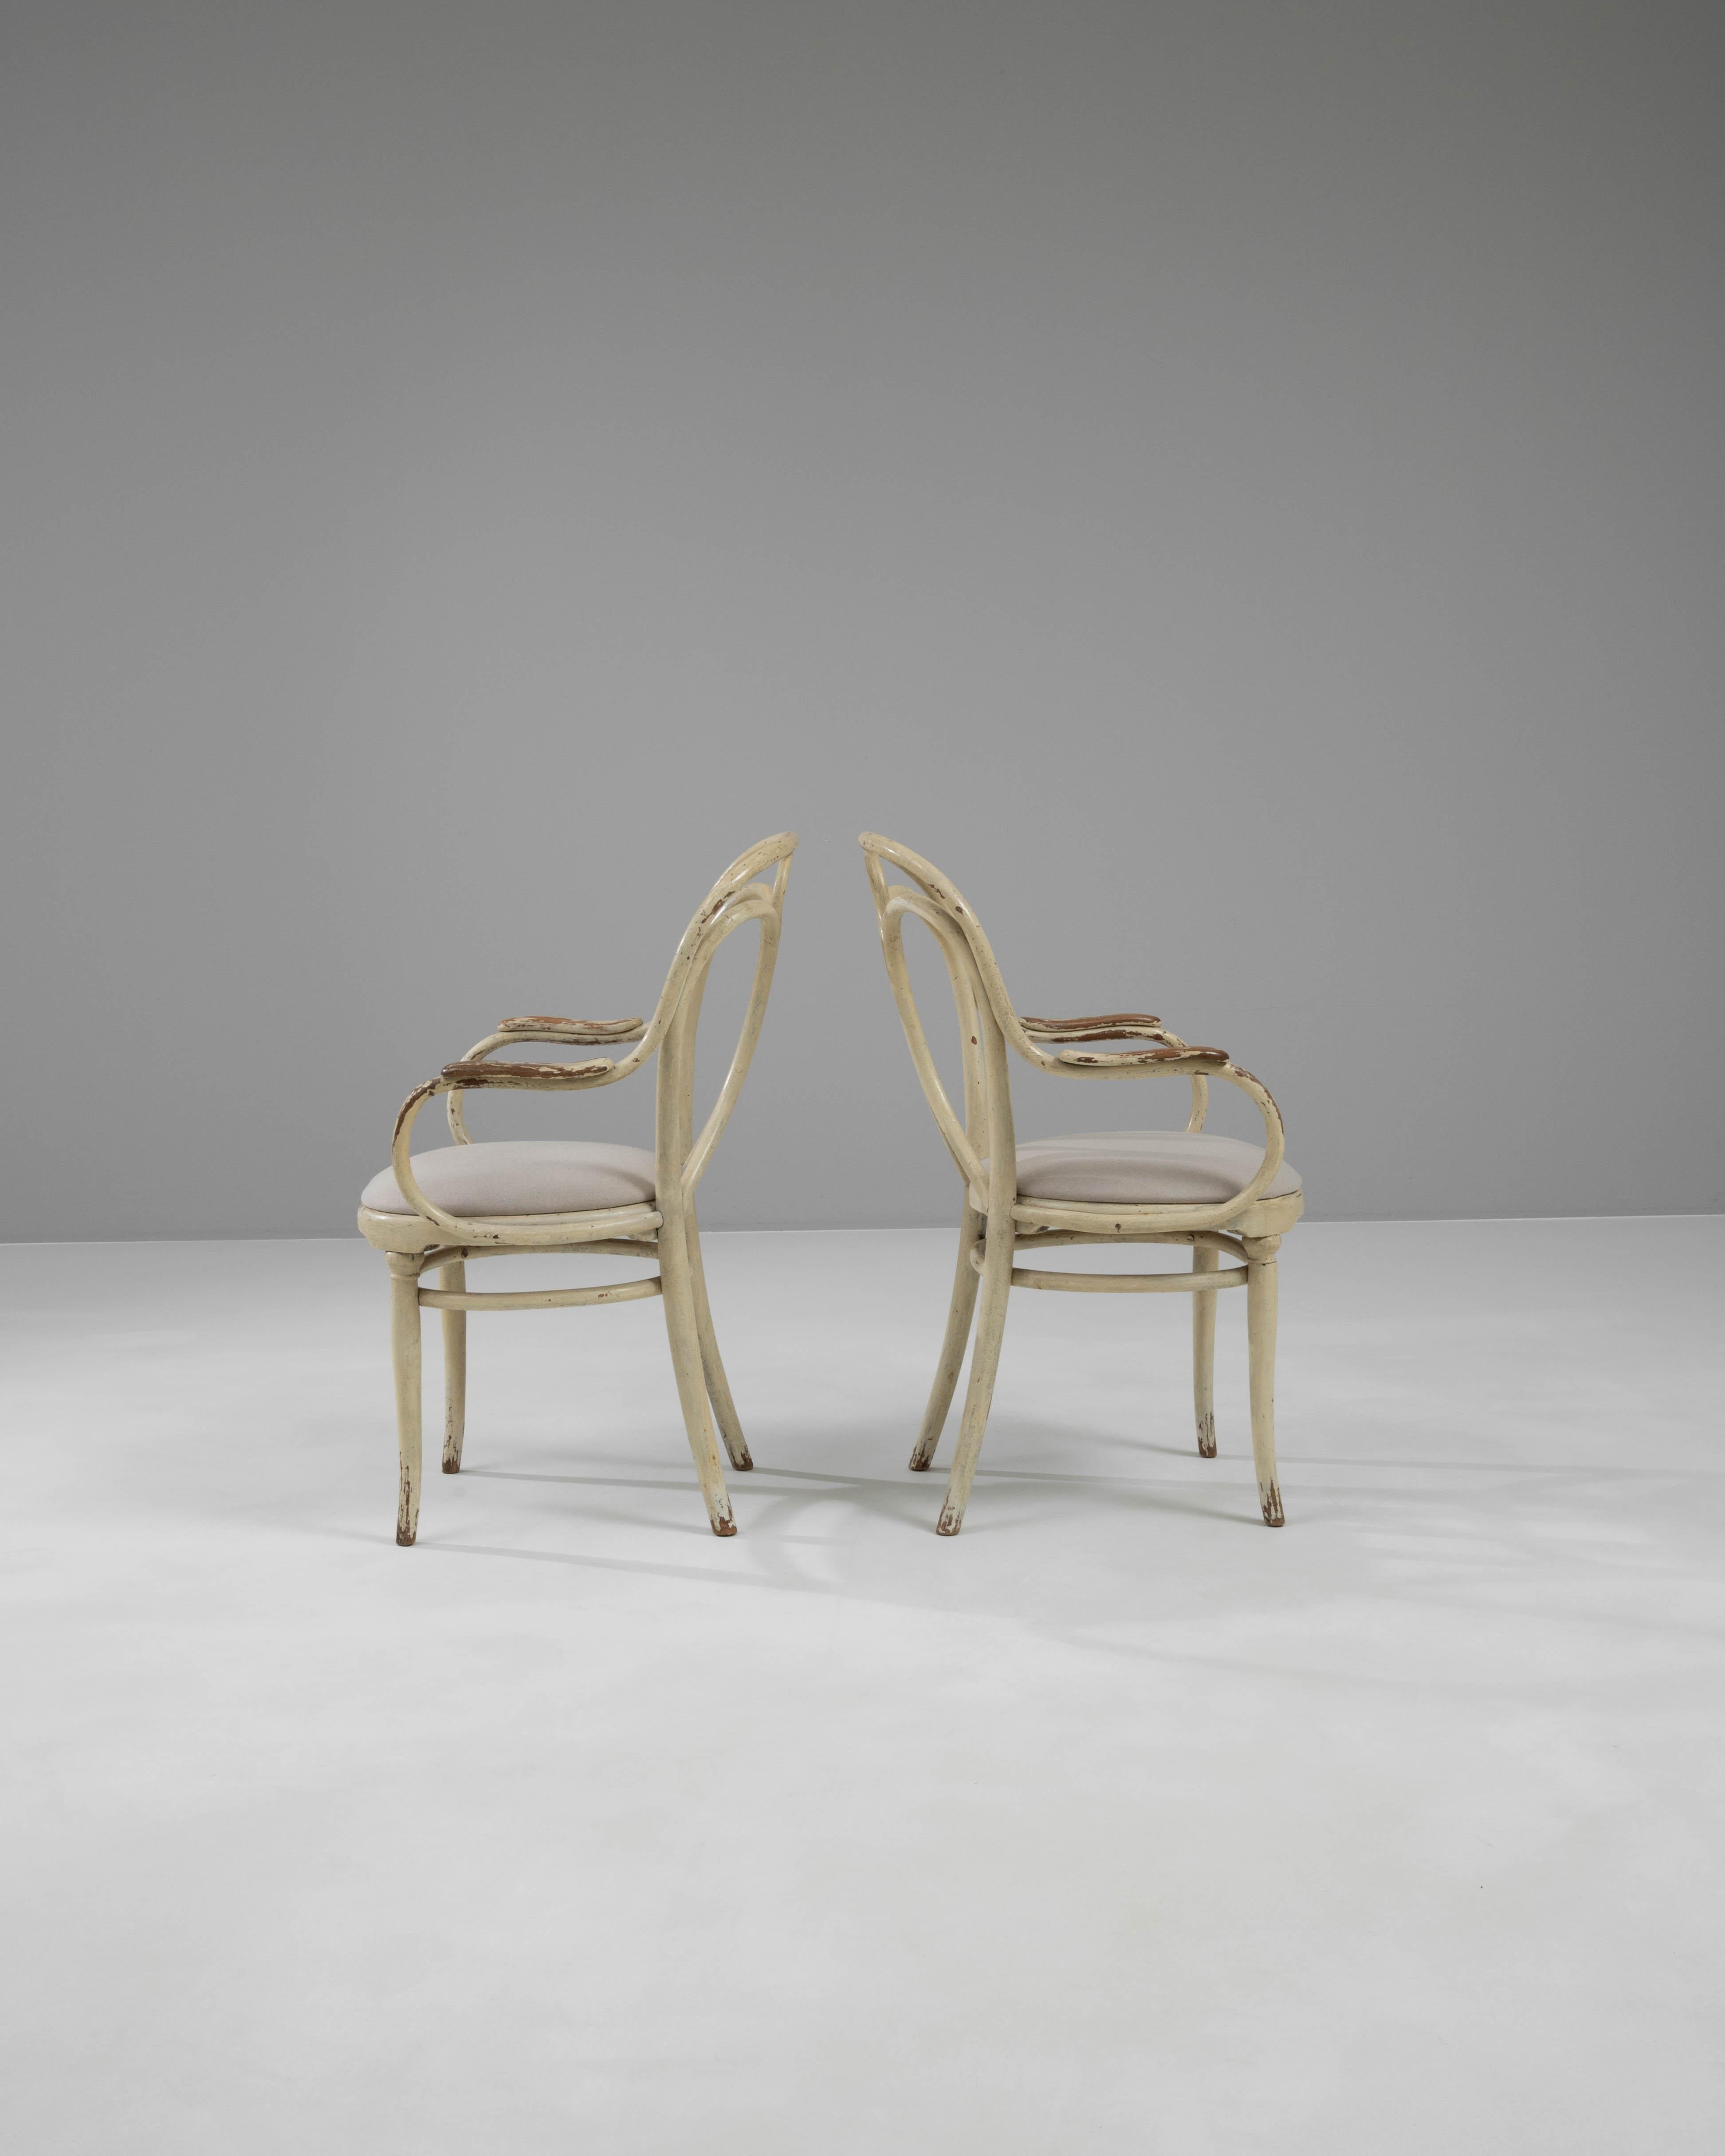 1900s Austrian Wooden Chairs, a Pair For Sale 2